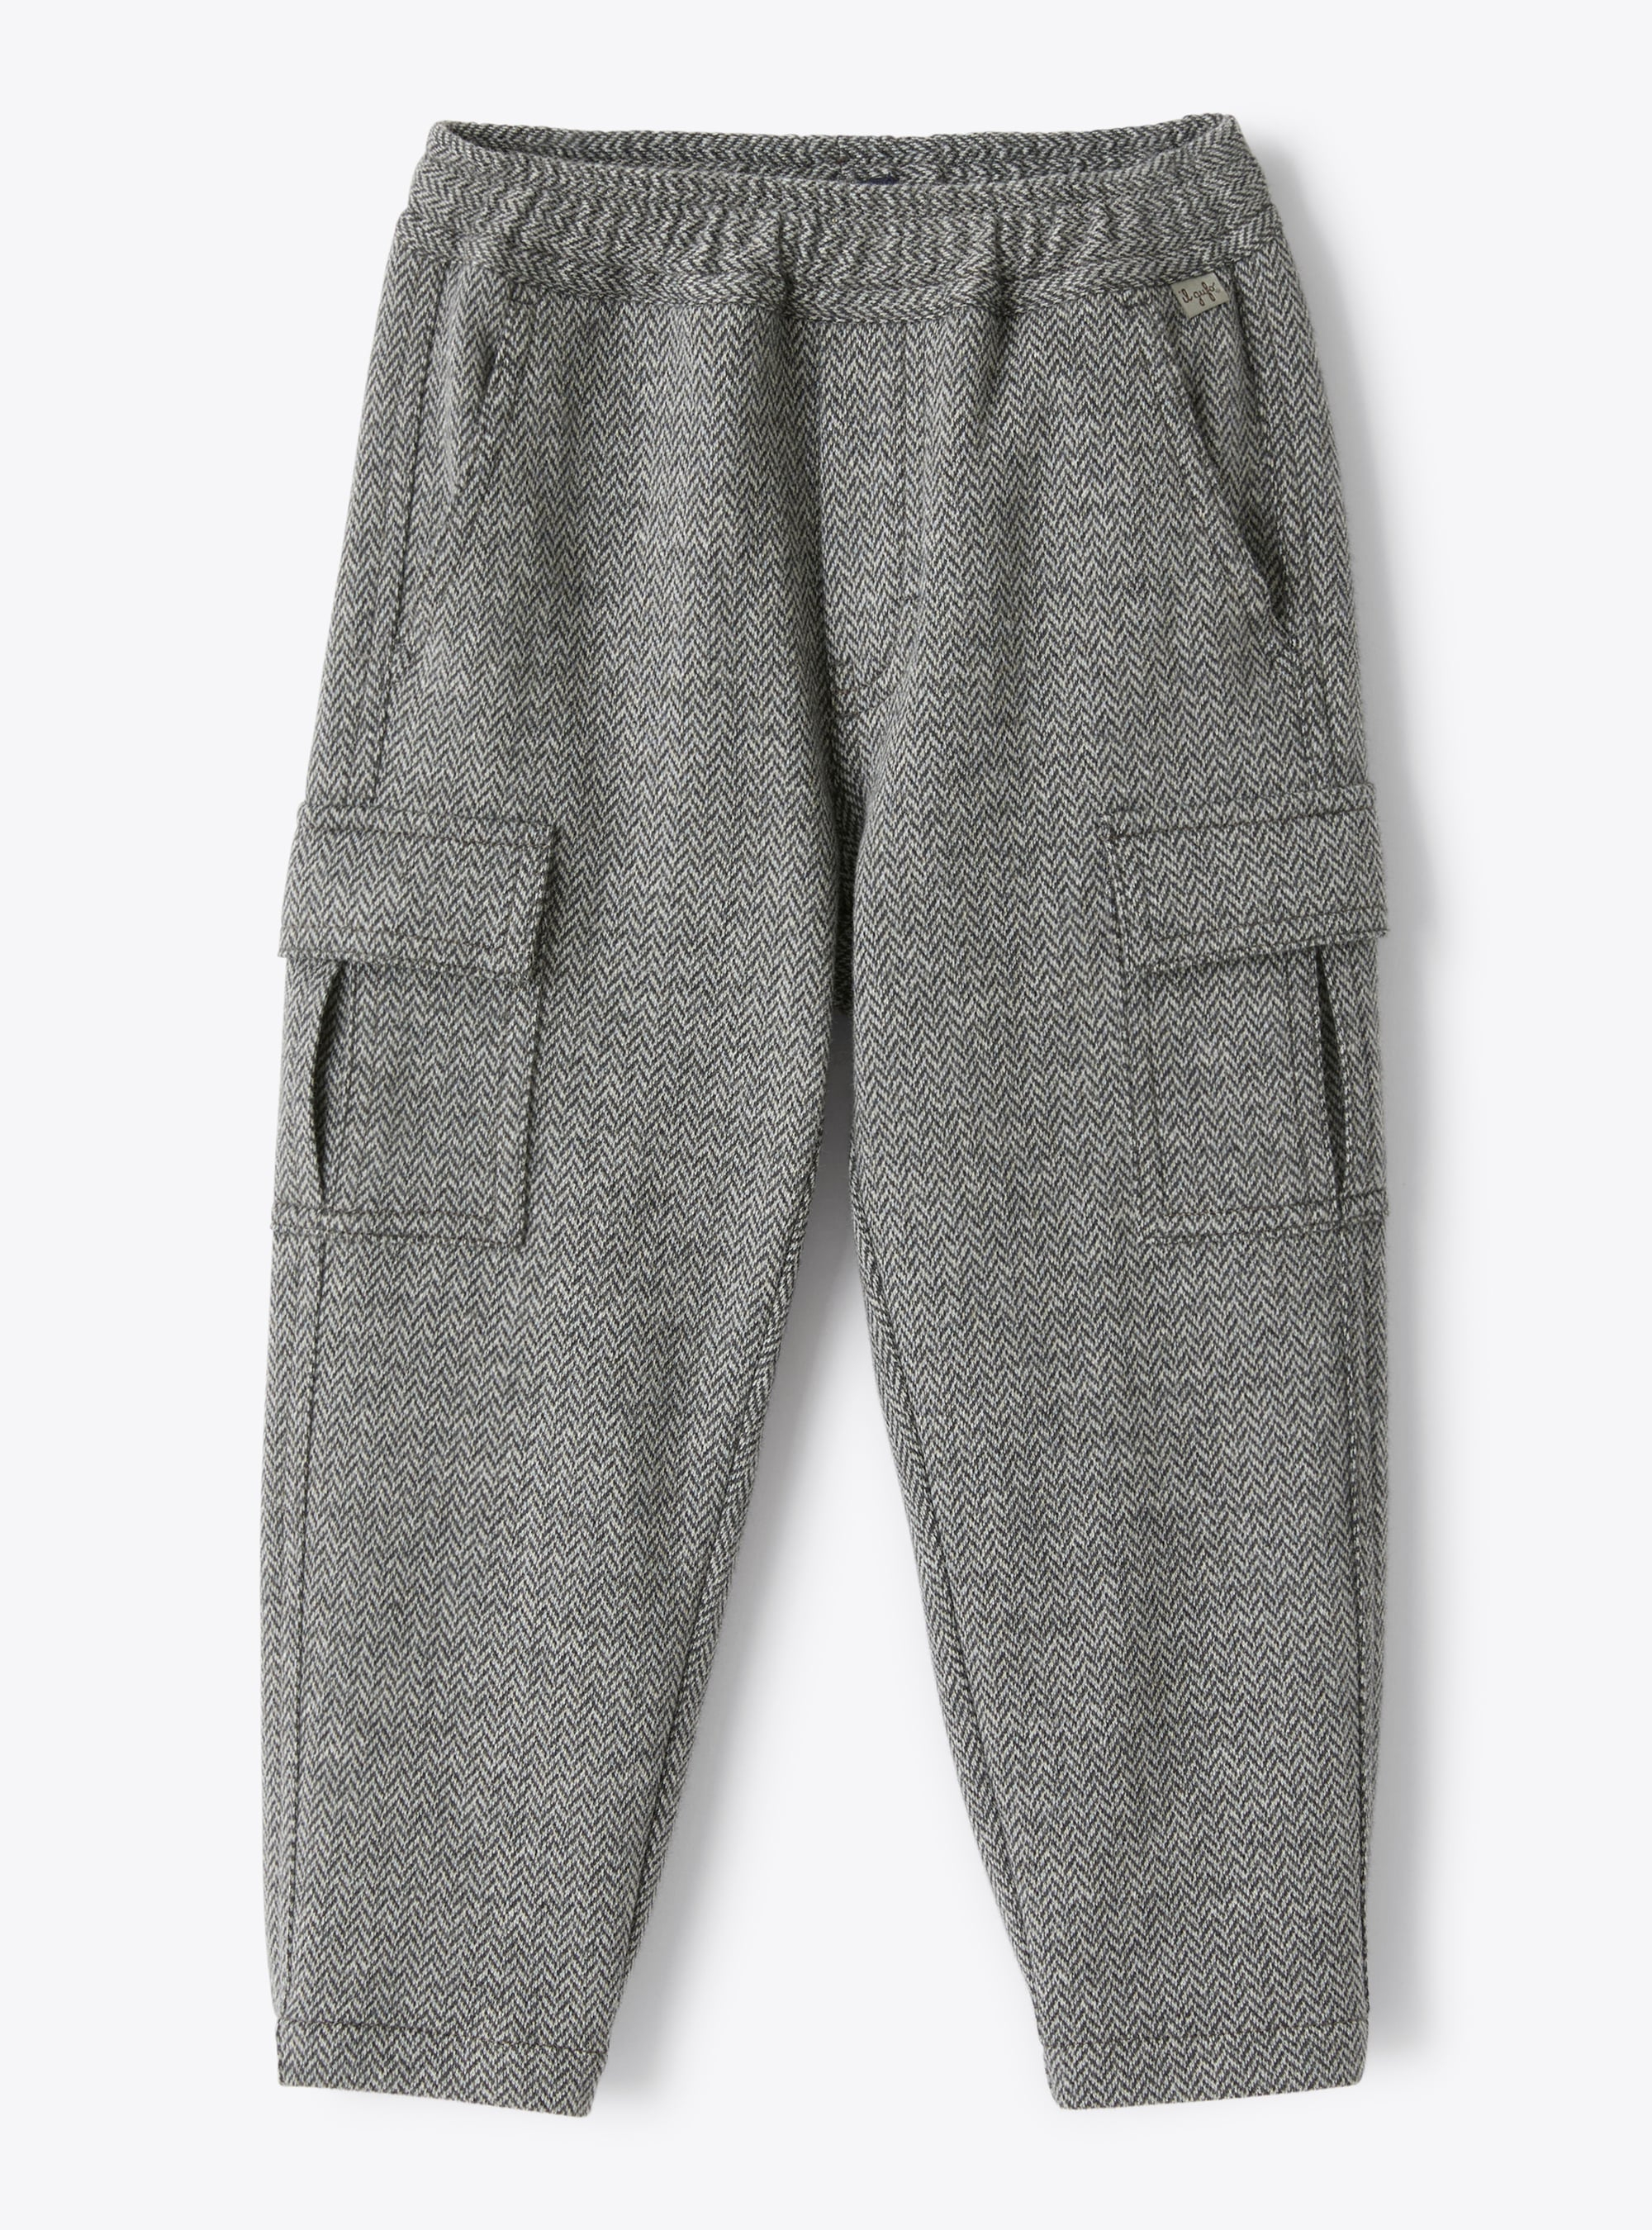 Cargo pants with a herringbone pattern - Trousers - Il Gufo